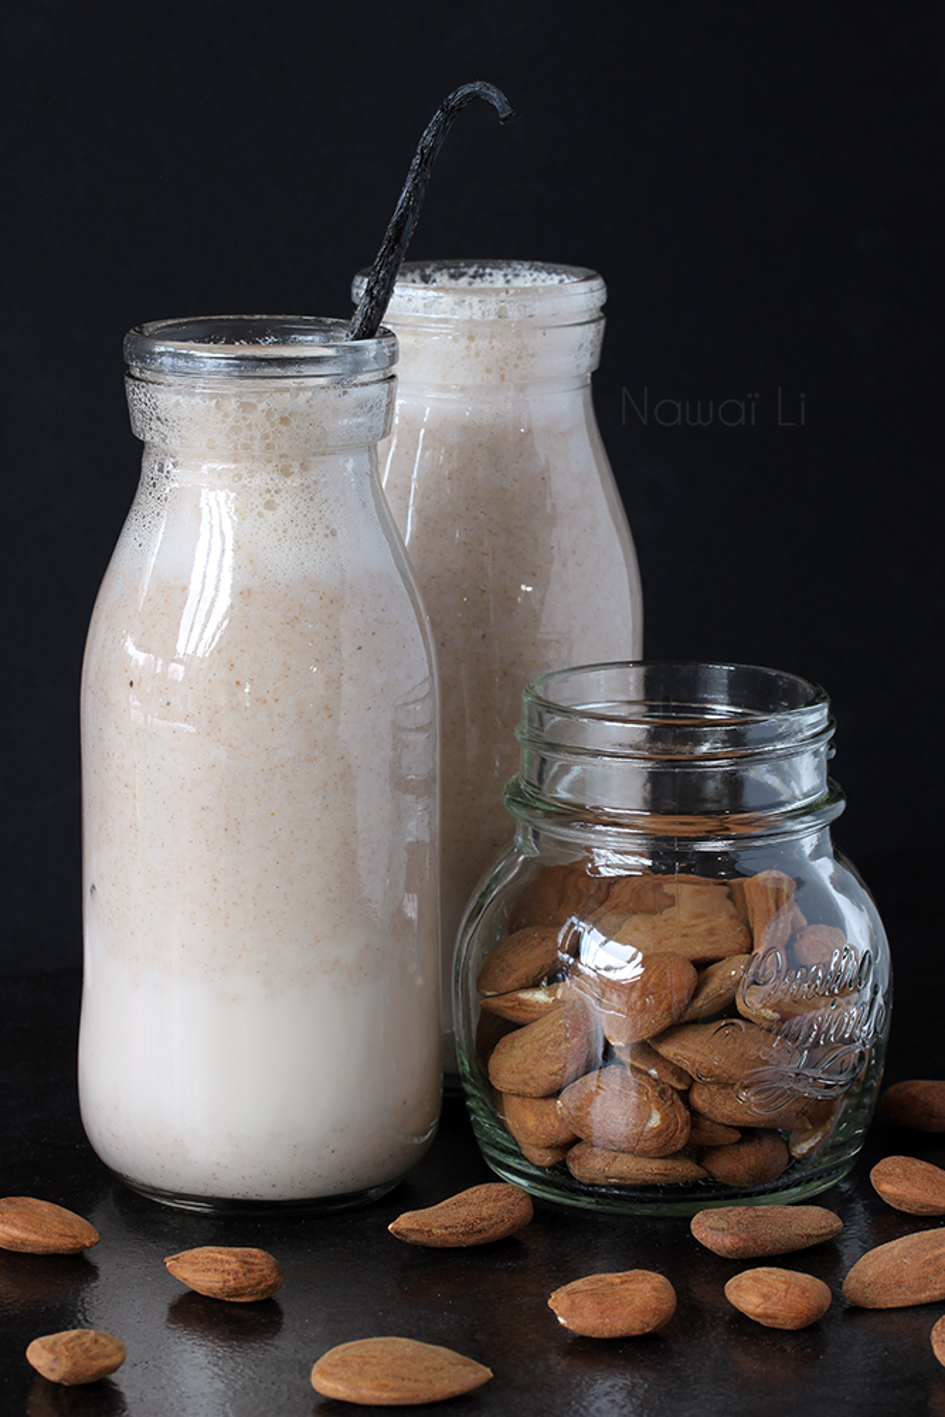 Fresh-made almond drink in two glasses with whole almonds in another glass beside them